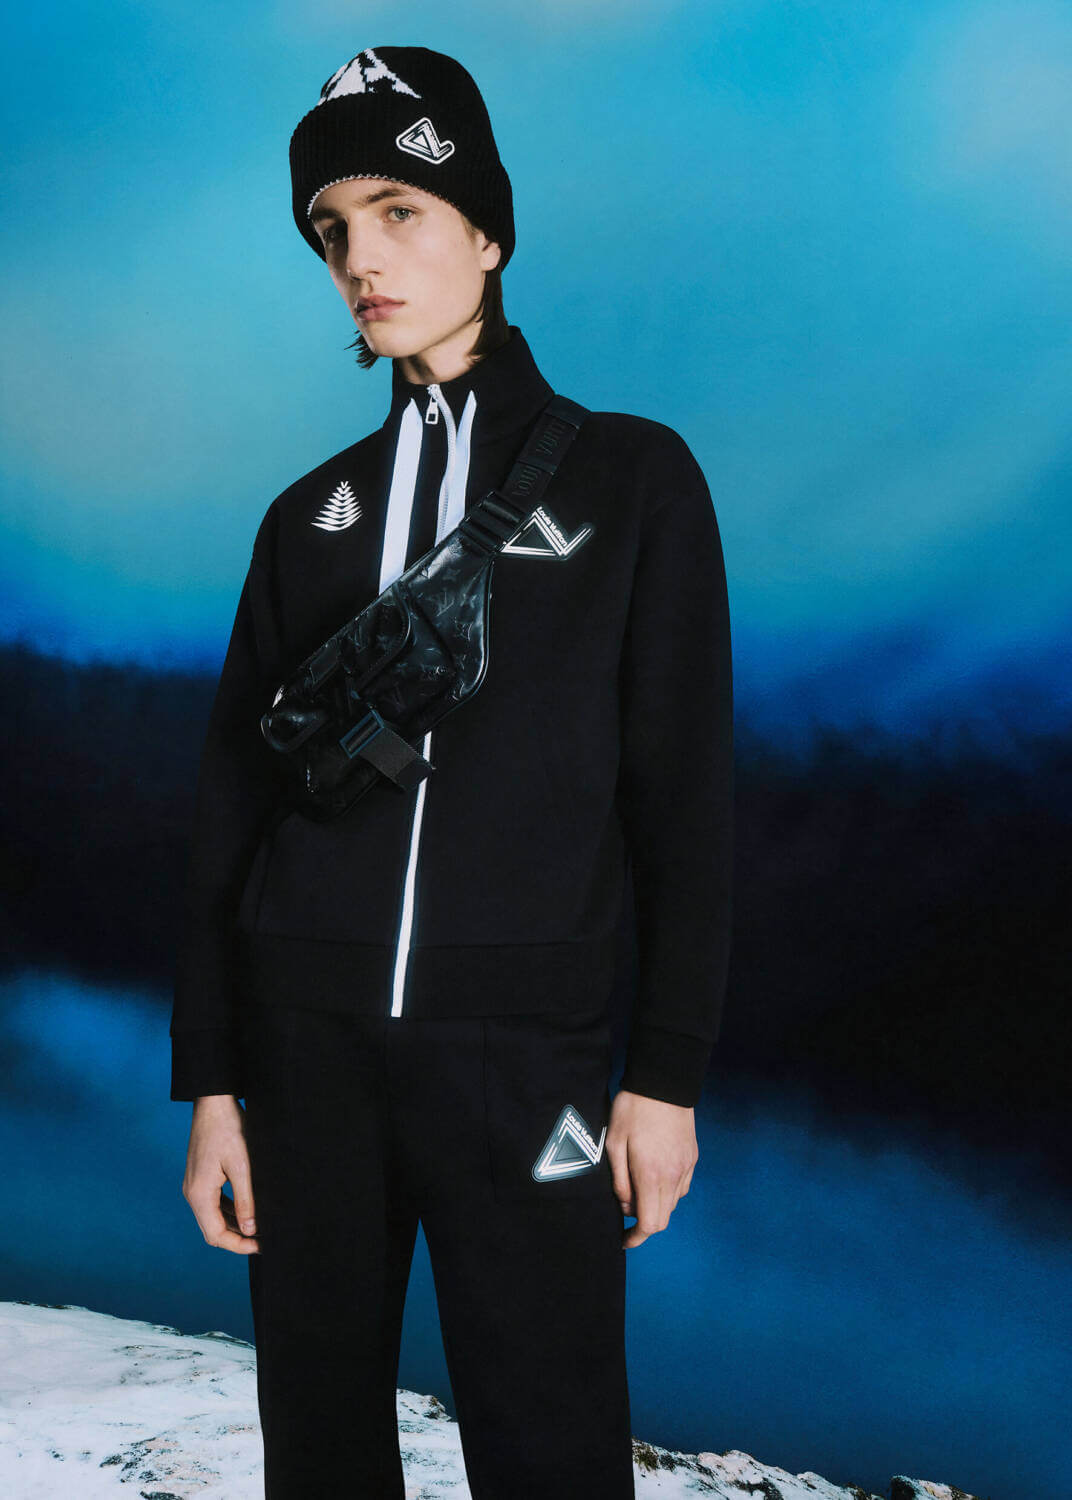 Louis Vuitton Hits The Slopes With Men's Skiwear Capsule - 10 Magazine